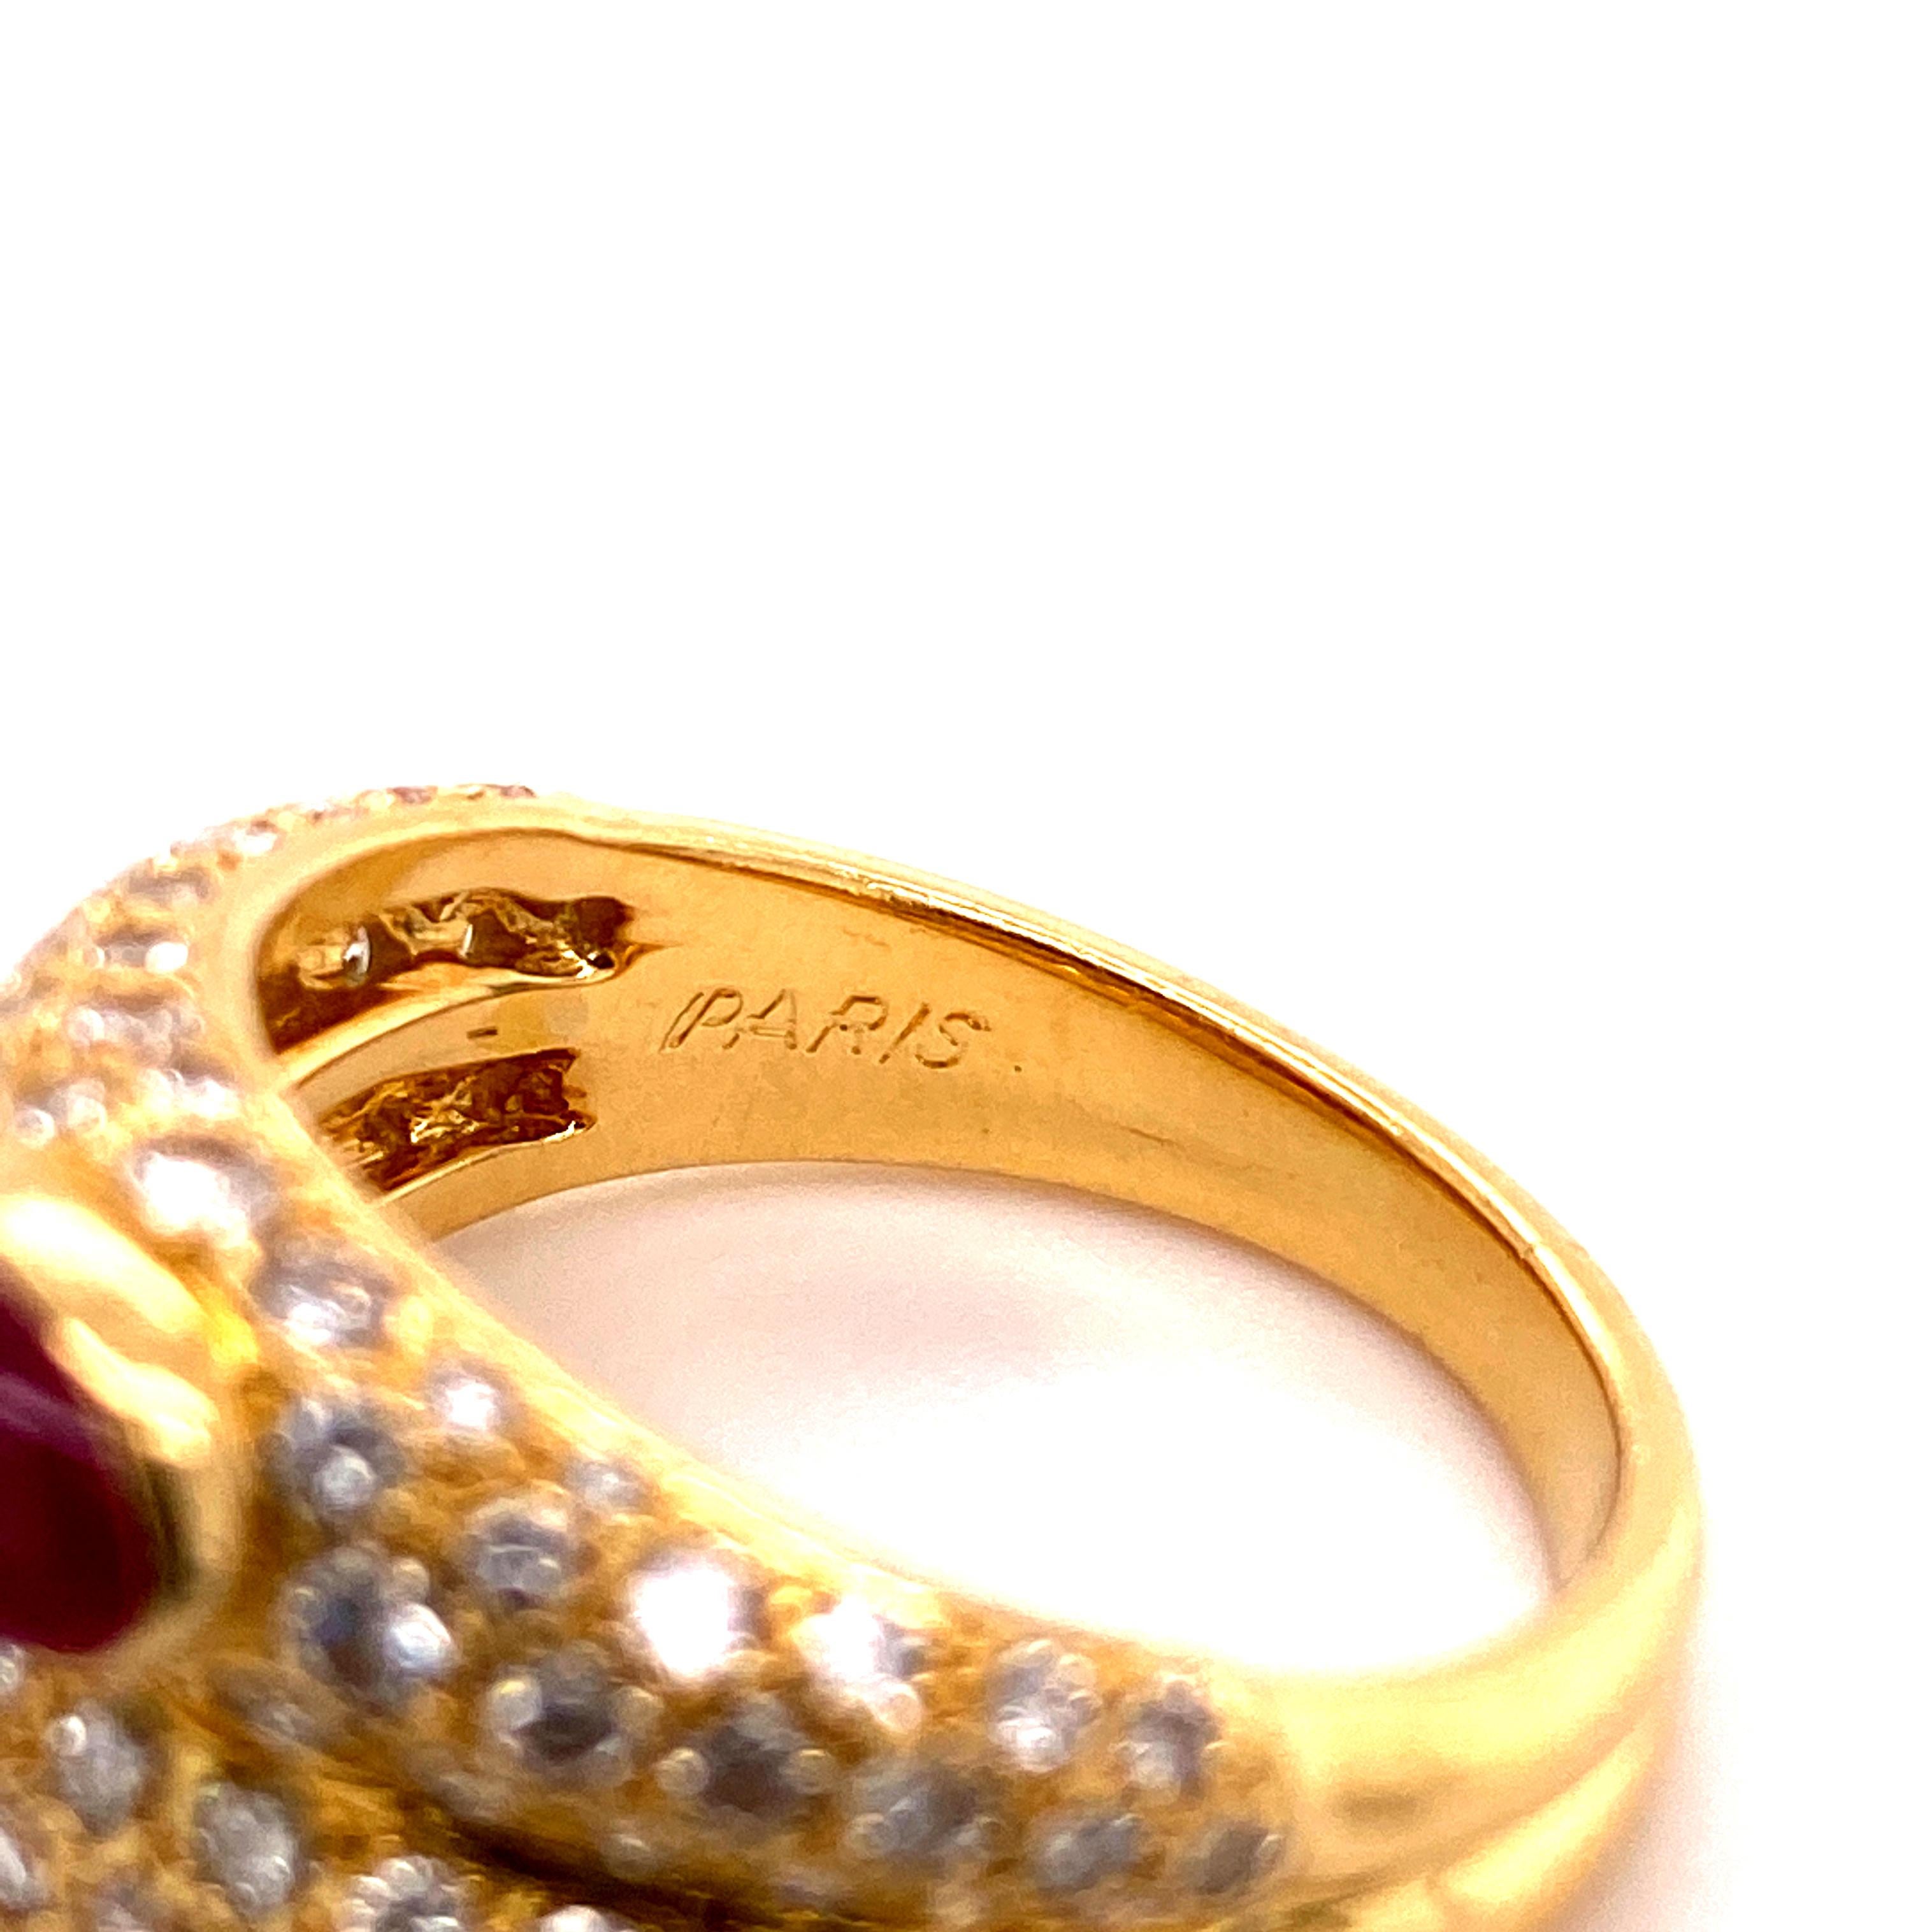 Cartier Ruby and Diamond Ring in 18 Karat Yellow Gold 1